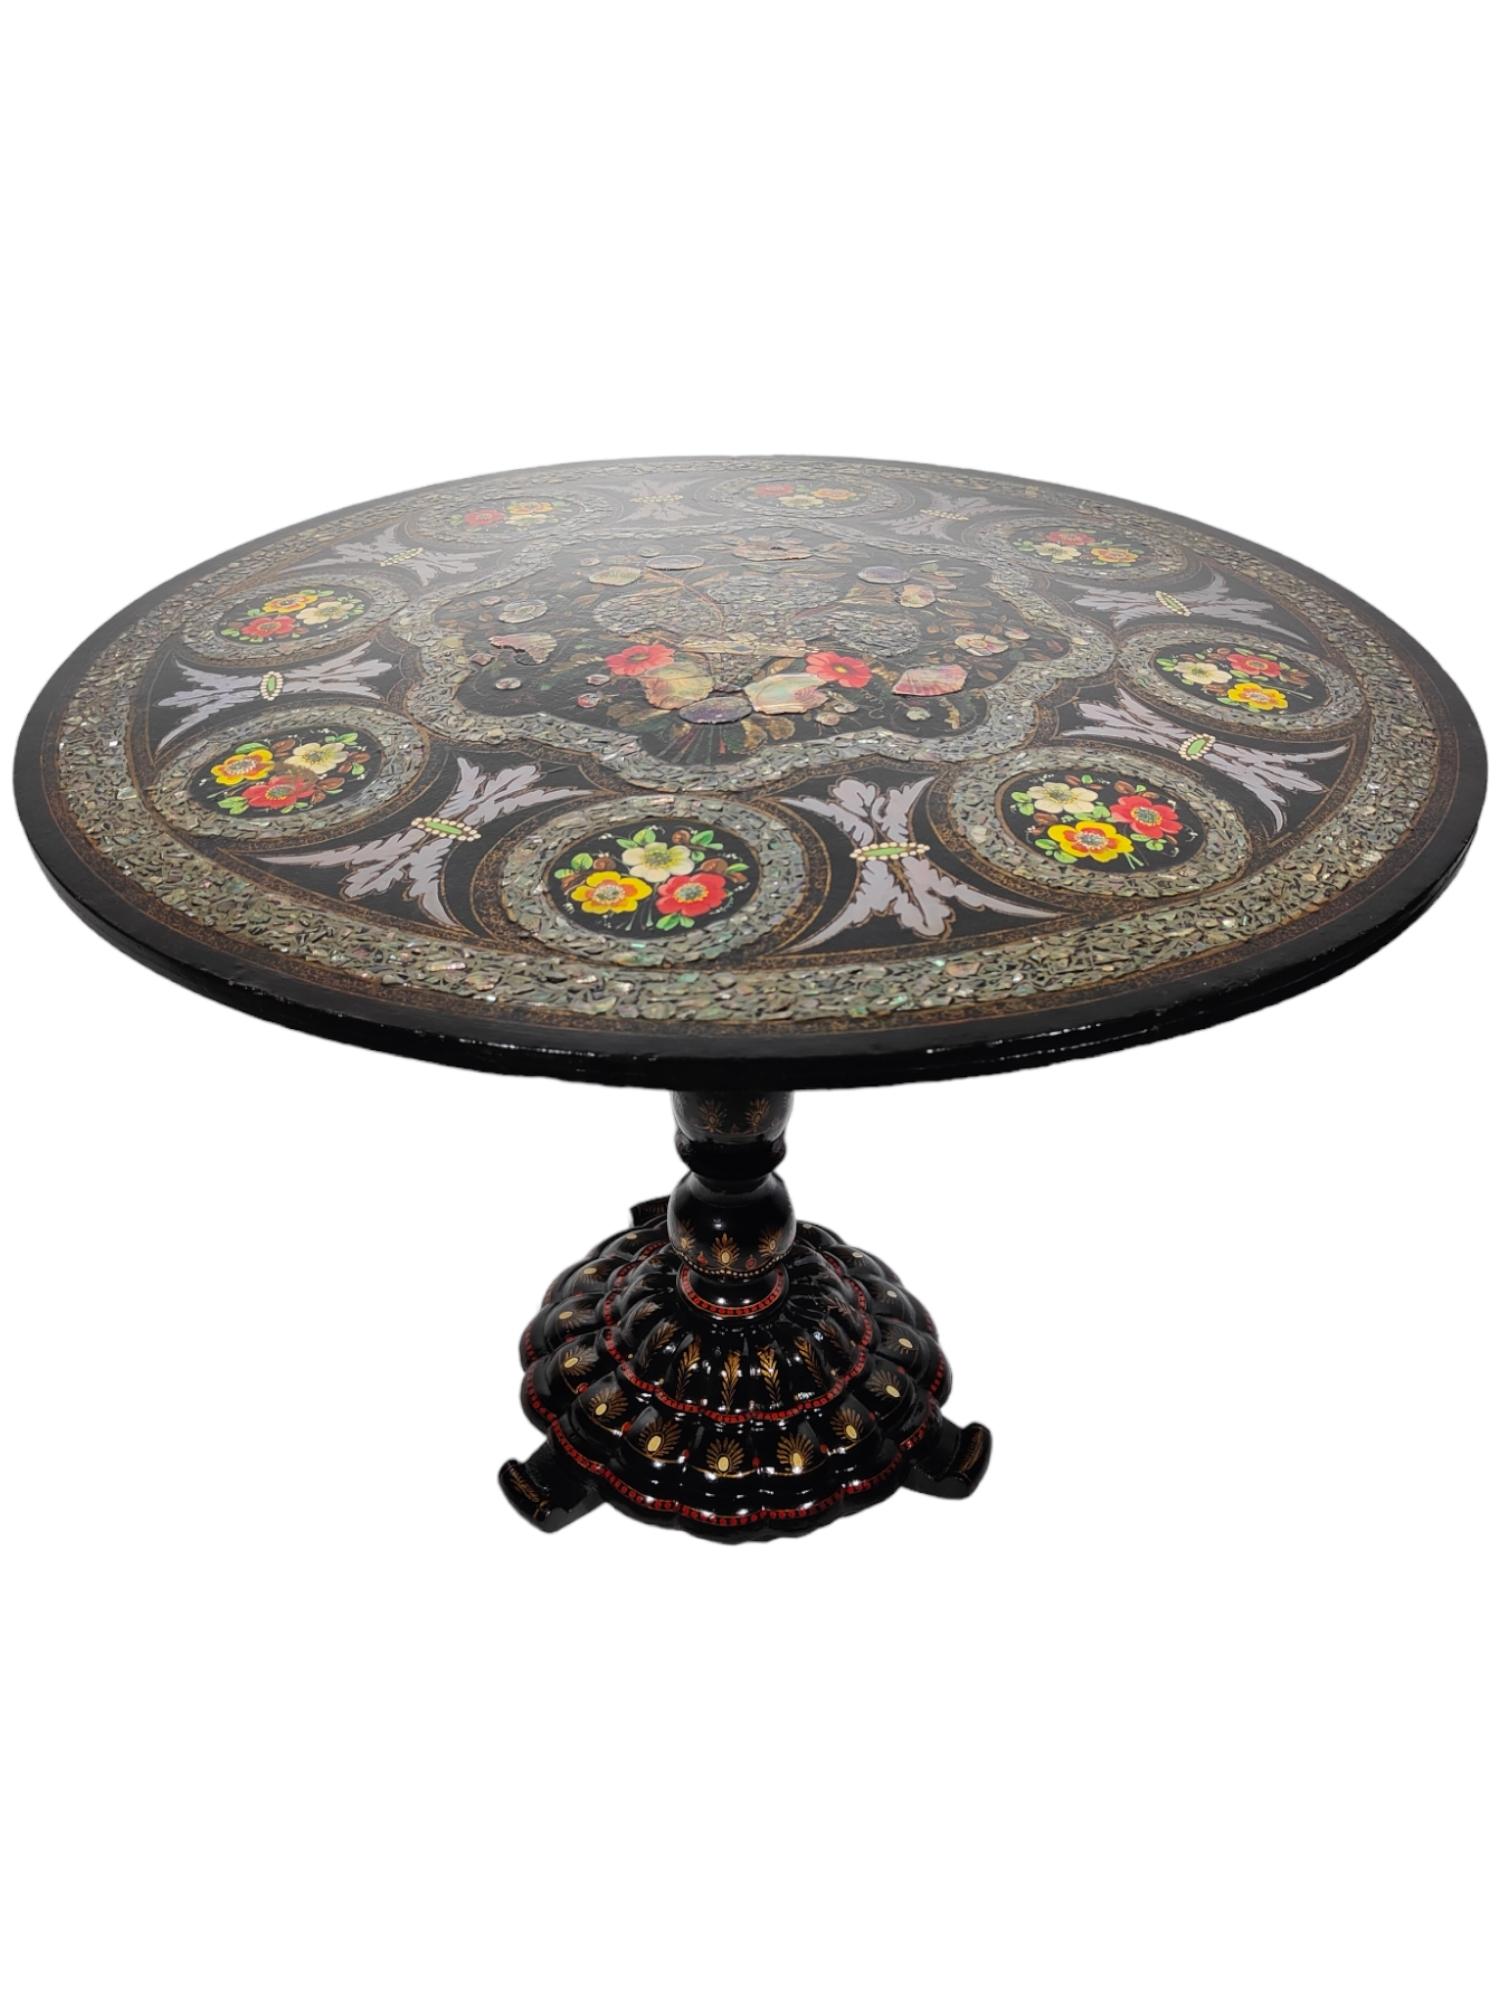 19th century French table with mother of pearl.
French table from the 19th century with mother-of-pearl very decorative table from the 19th century with mother-of-pearl inlays and hand-painted. Measures 91 cm in diameter and 73 cm in height